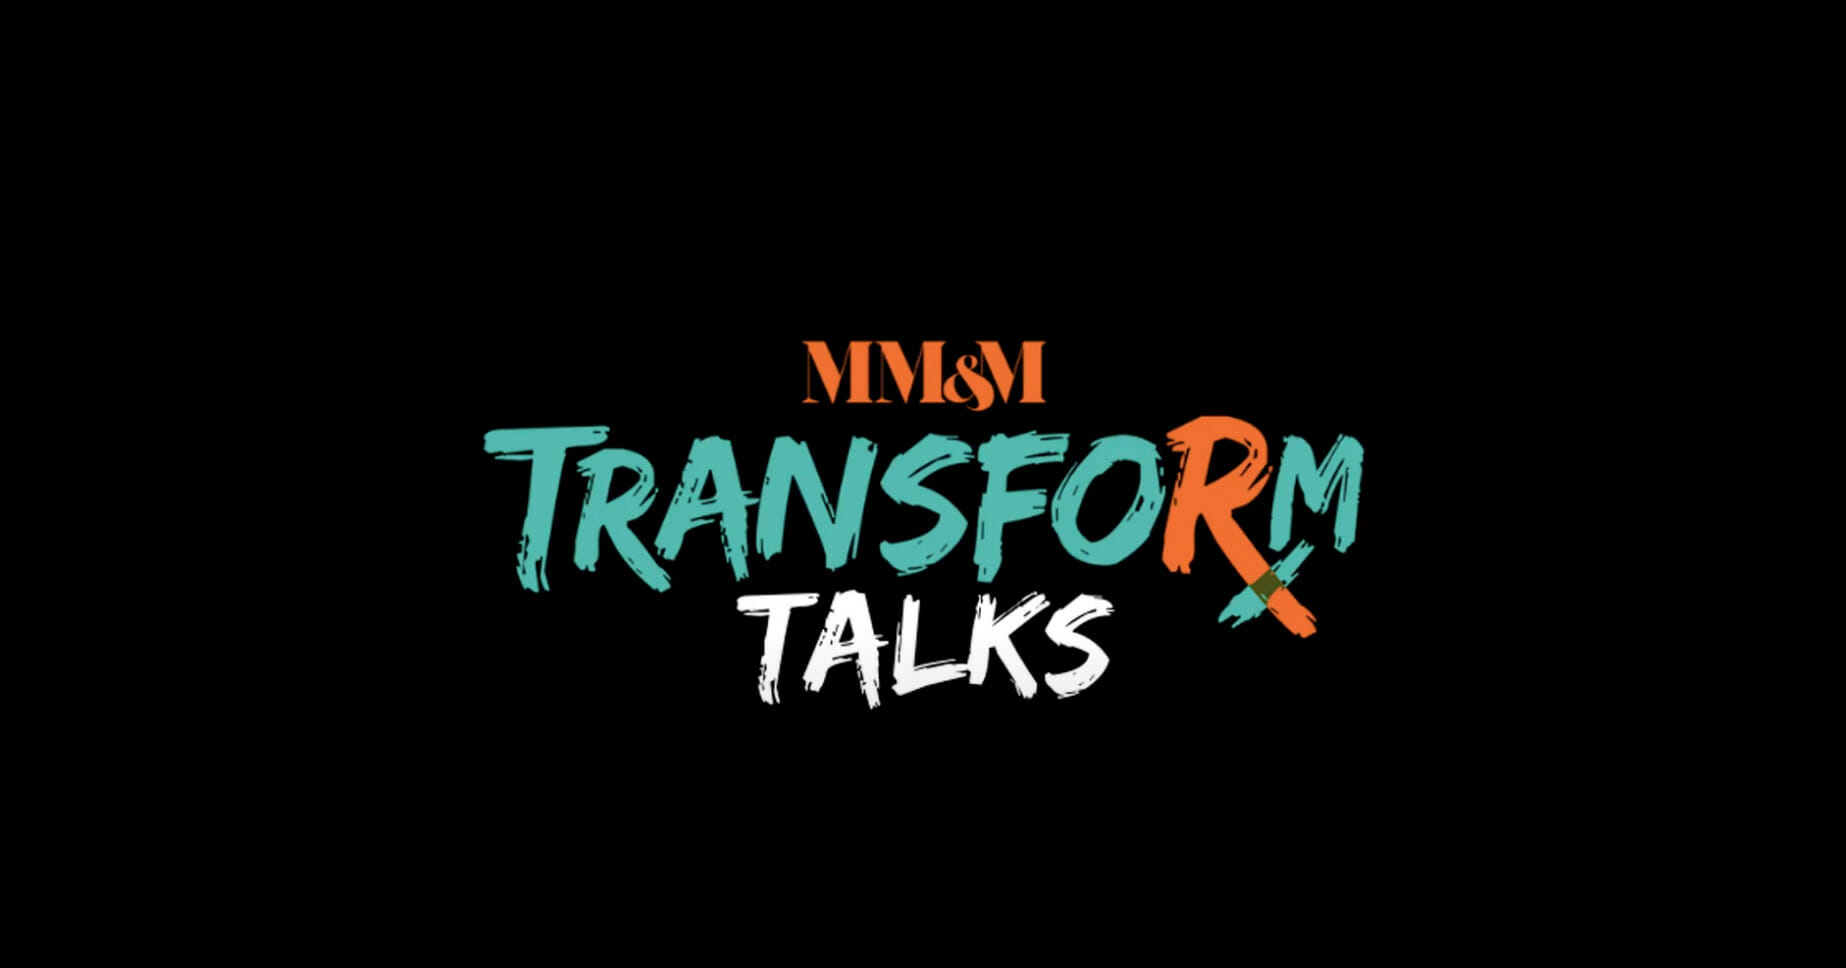 MM&M Transform Talks: Prioritizing the patient perspective